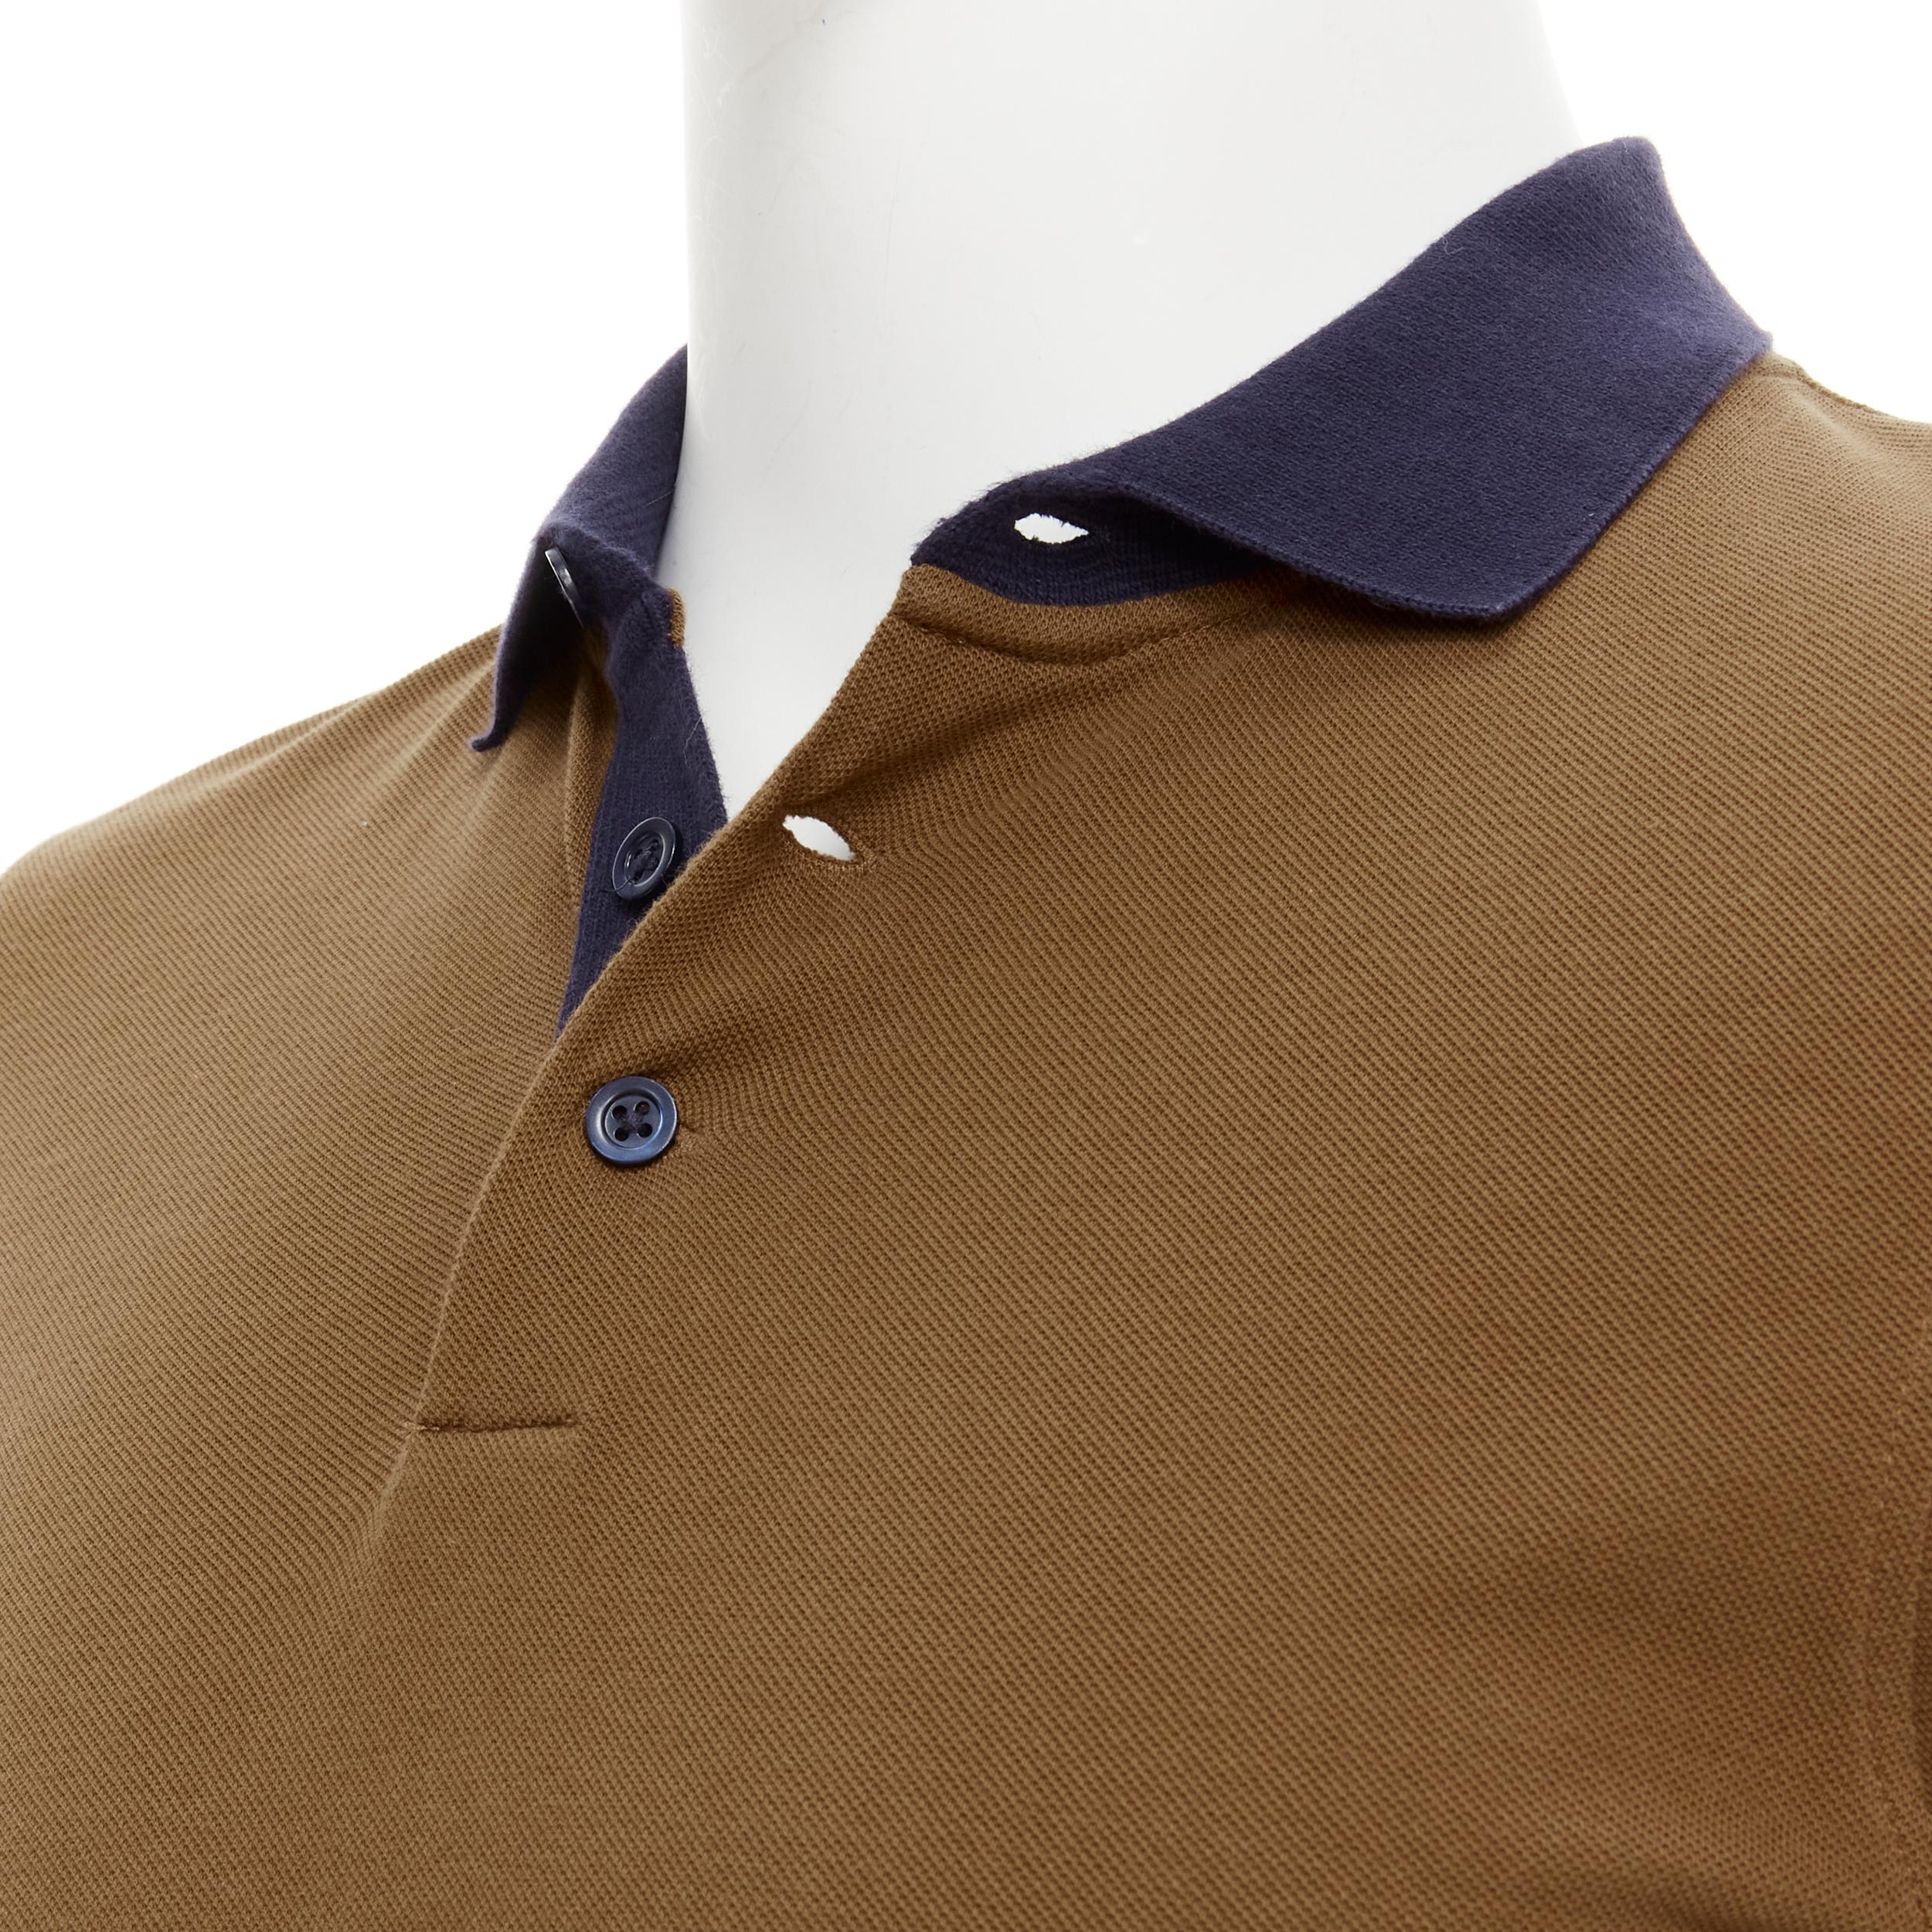 BRUNELLO CUCINELLI Slim Fit brown navy polo shirt XS 
Reference: CRTI/A00723 
Brand: Brunello Cucinelli 
Material: Cotton 
Color: Brown 
Pattern: Solid 
Closure: Button 
Made in: Italy 

CONDITION: 
Condition: Good, this item was pre-owned and is in